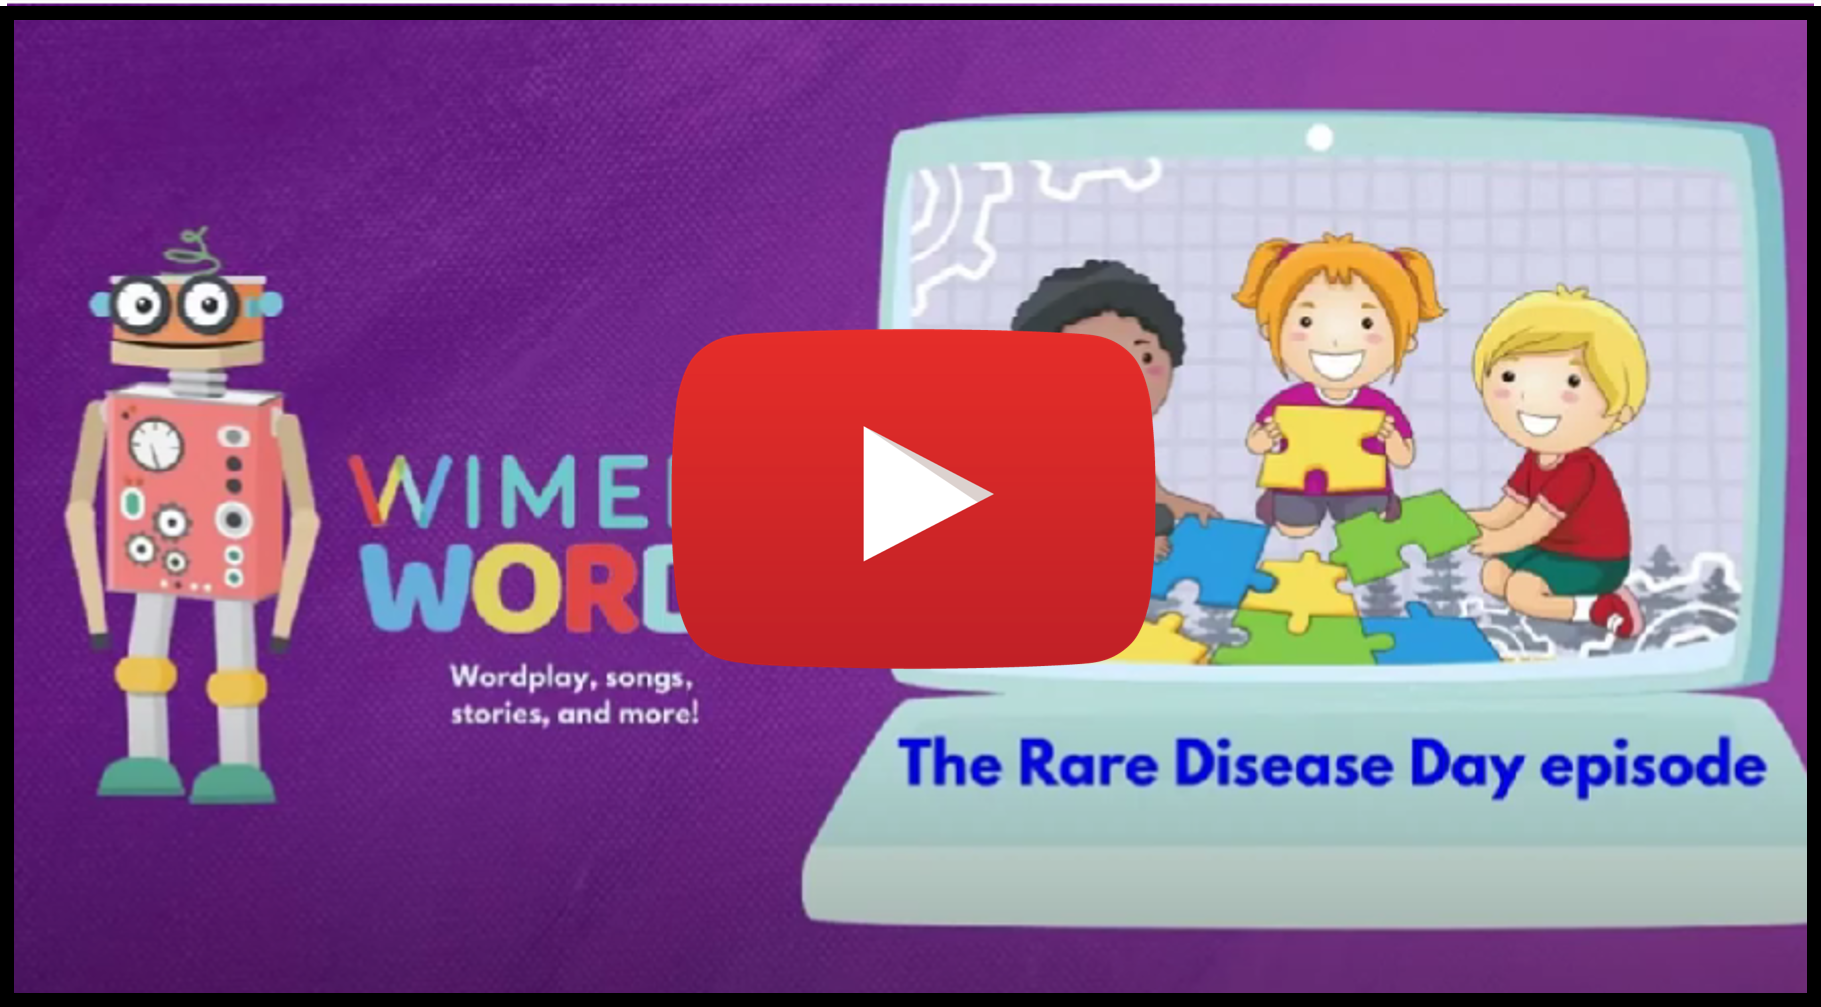 Extraordinary! A book for children with rare diseases